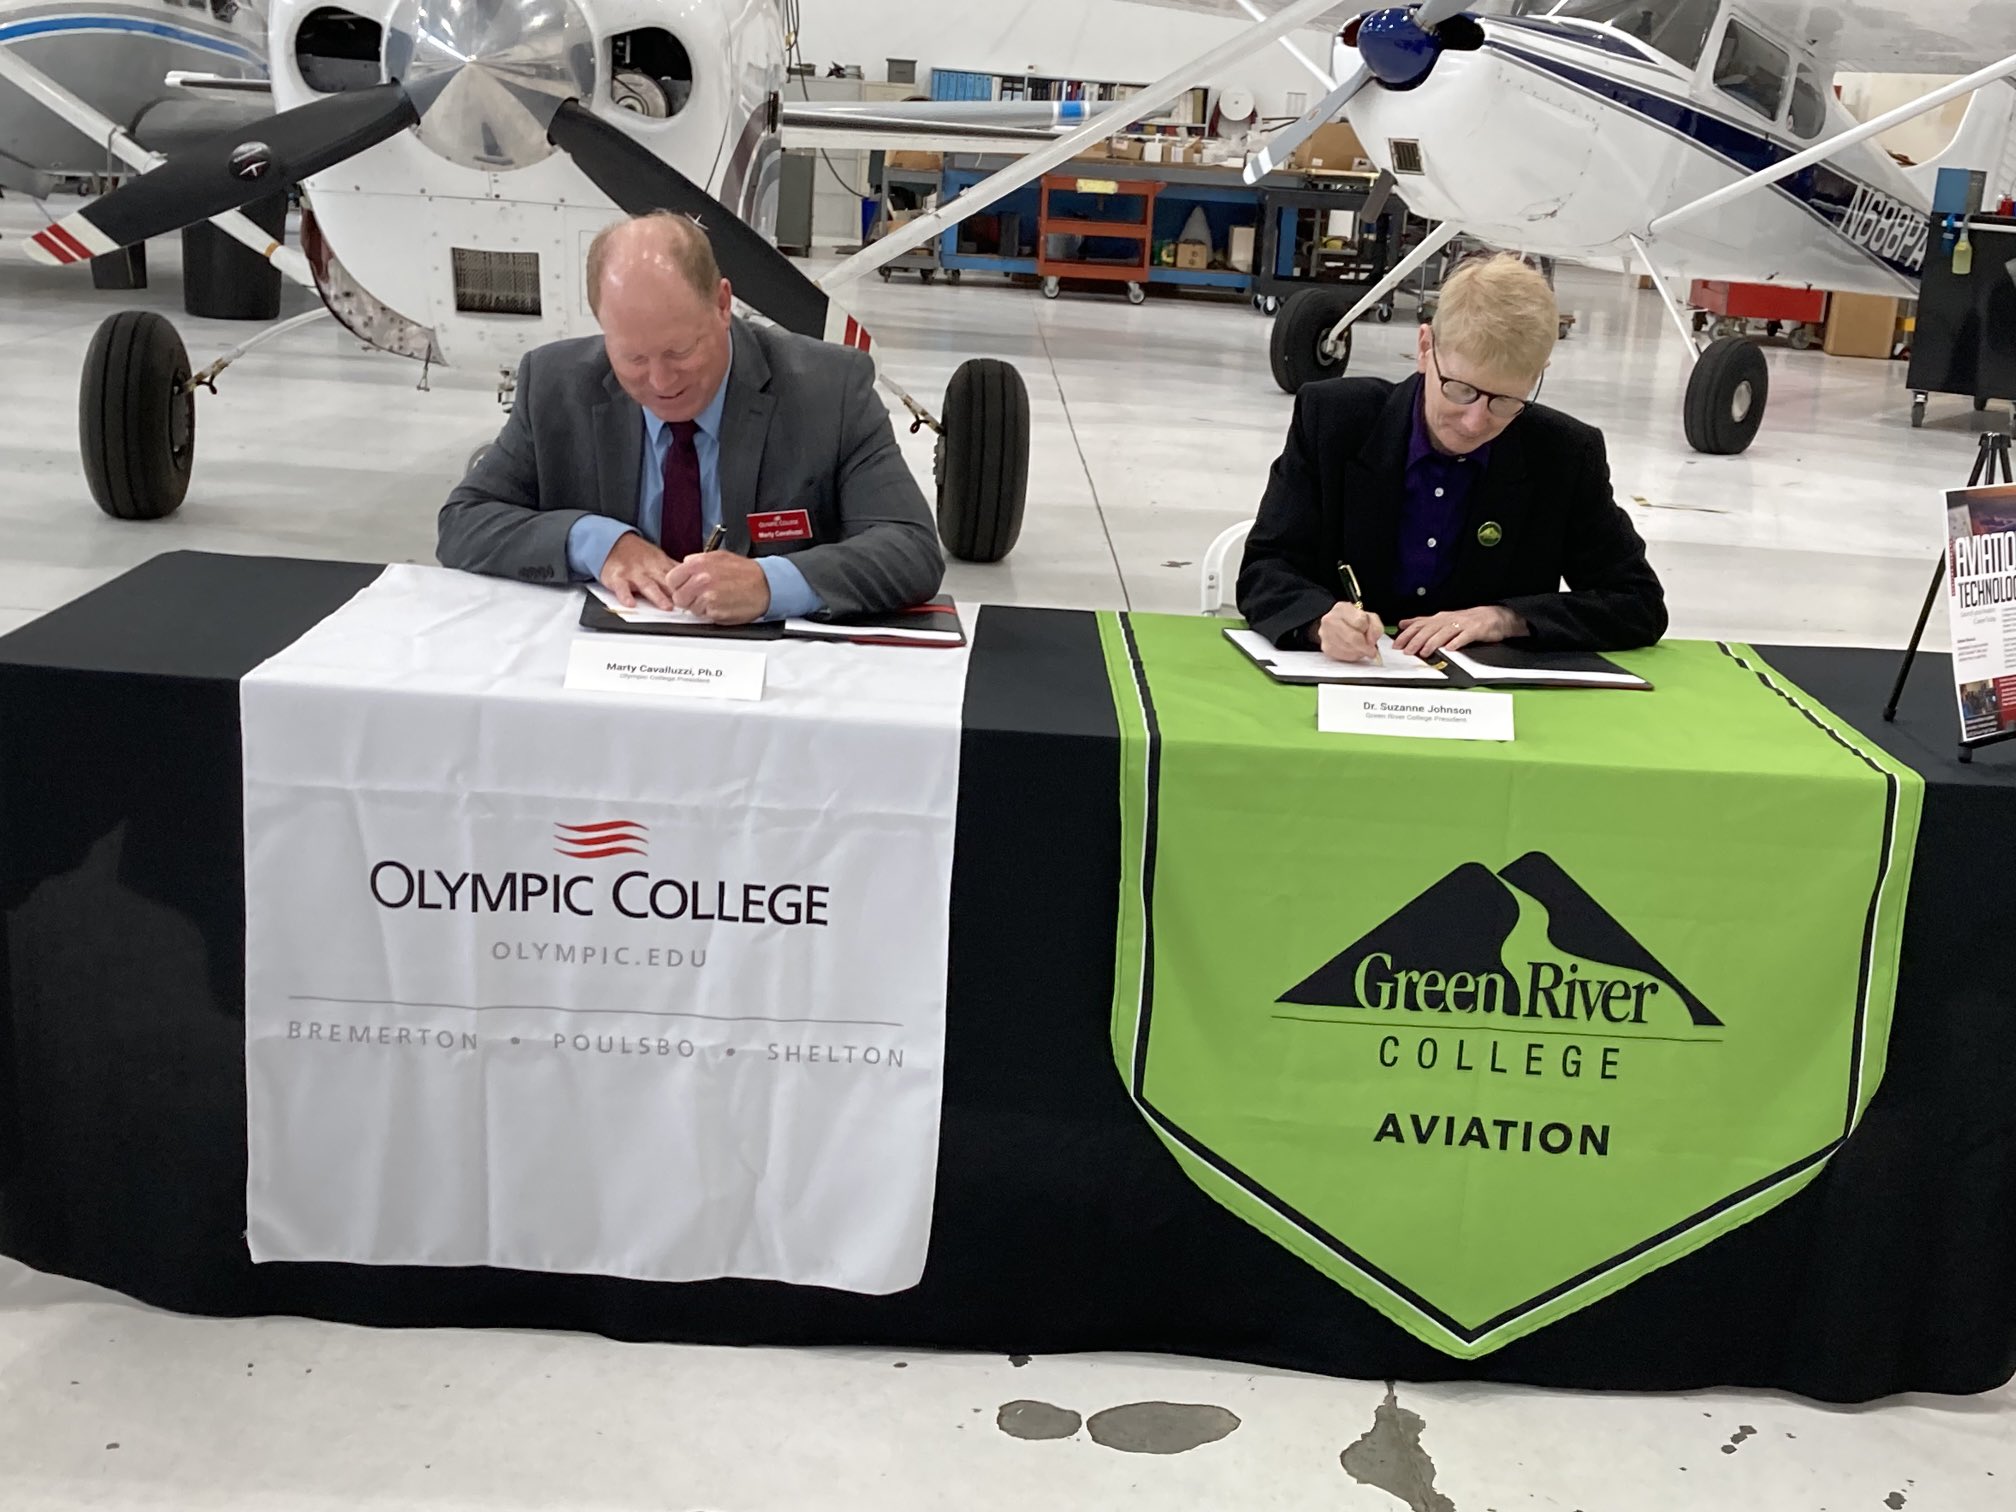 GRC Pres Johnson (right) and Olympic College president Marty Cavaluzzi (left) sign partnership